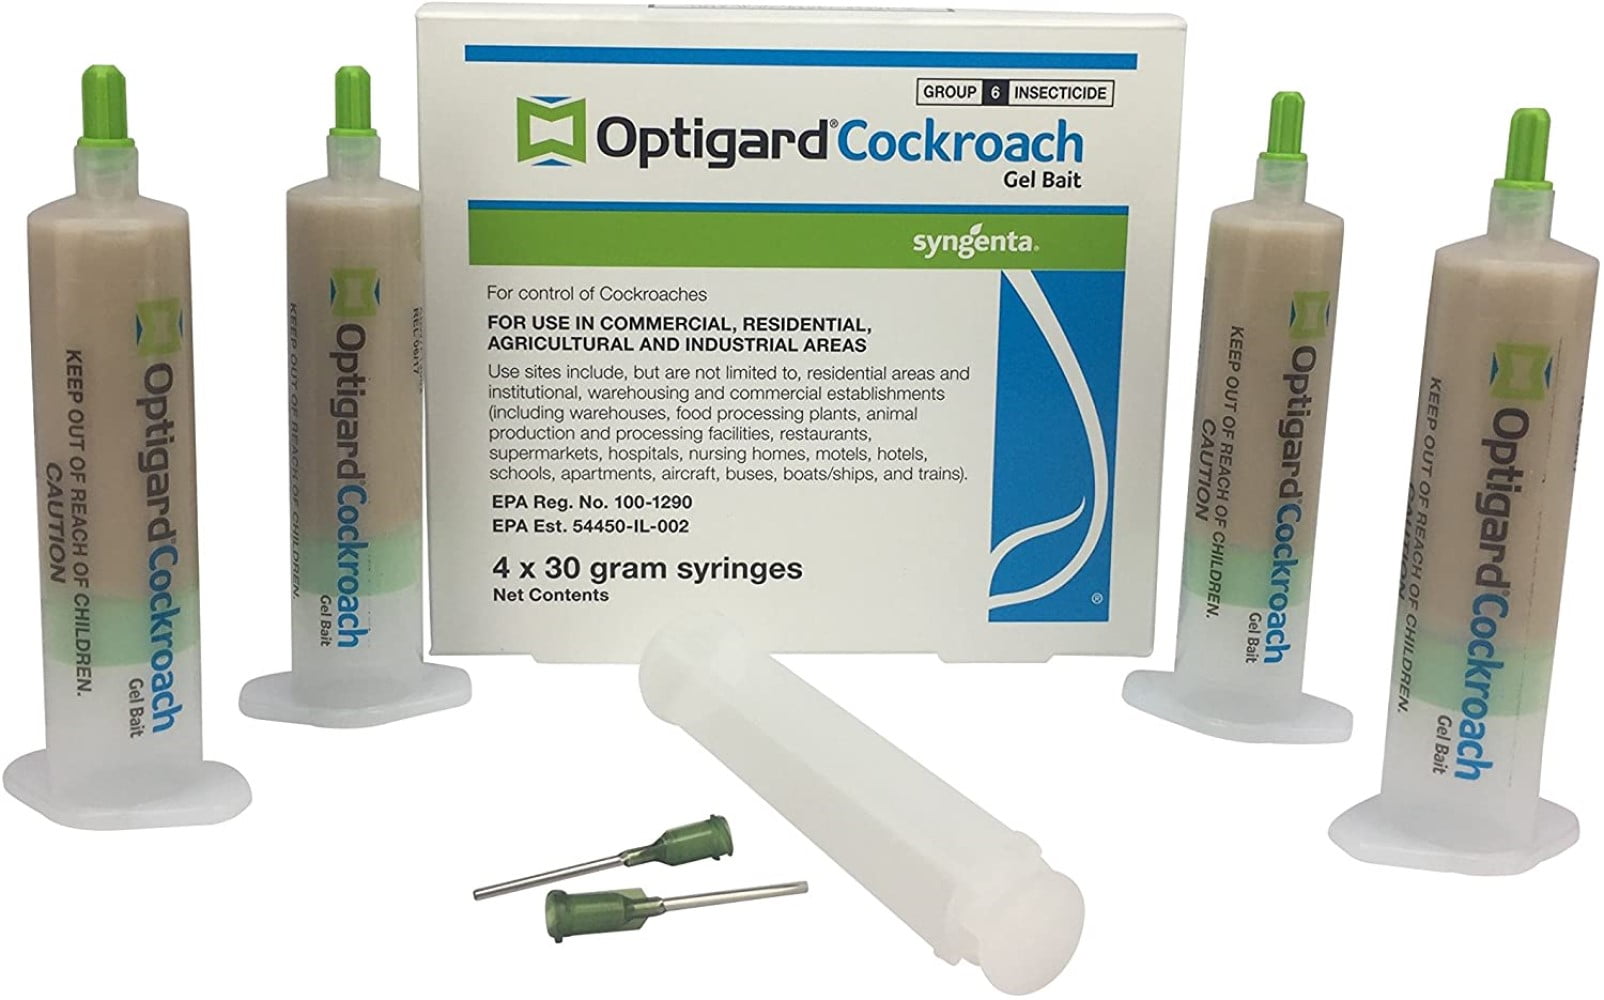 Optigard Cockroach Gel Bait - Kills Roaches Fast - 4 Pack (4 x 30g  Syringes) by Syngenta 